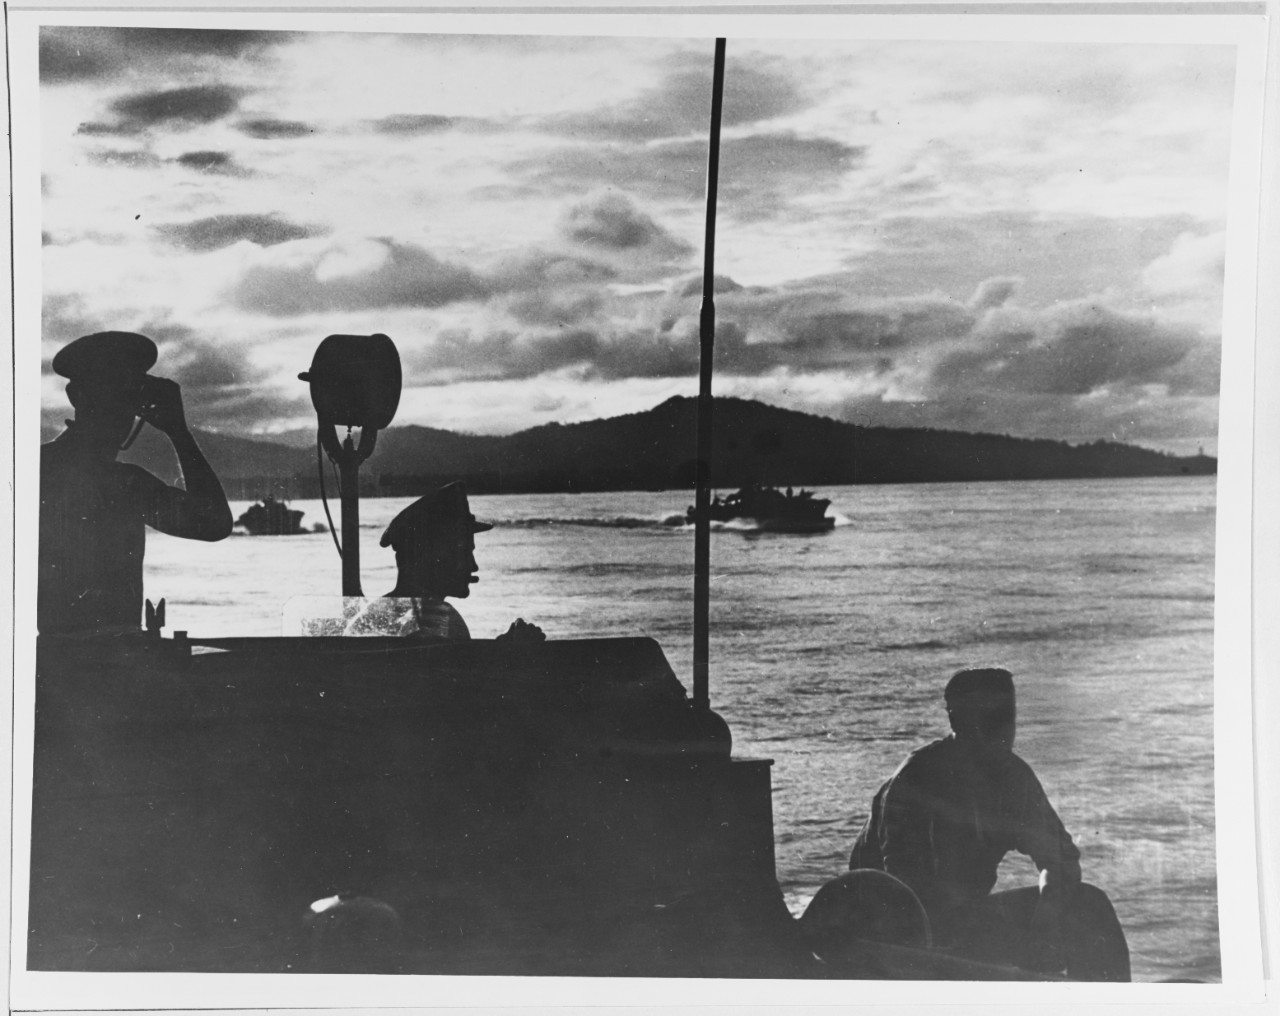 PT boats in New Guinea